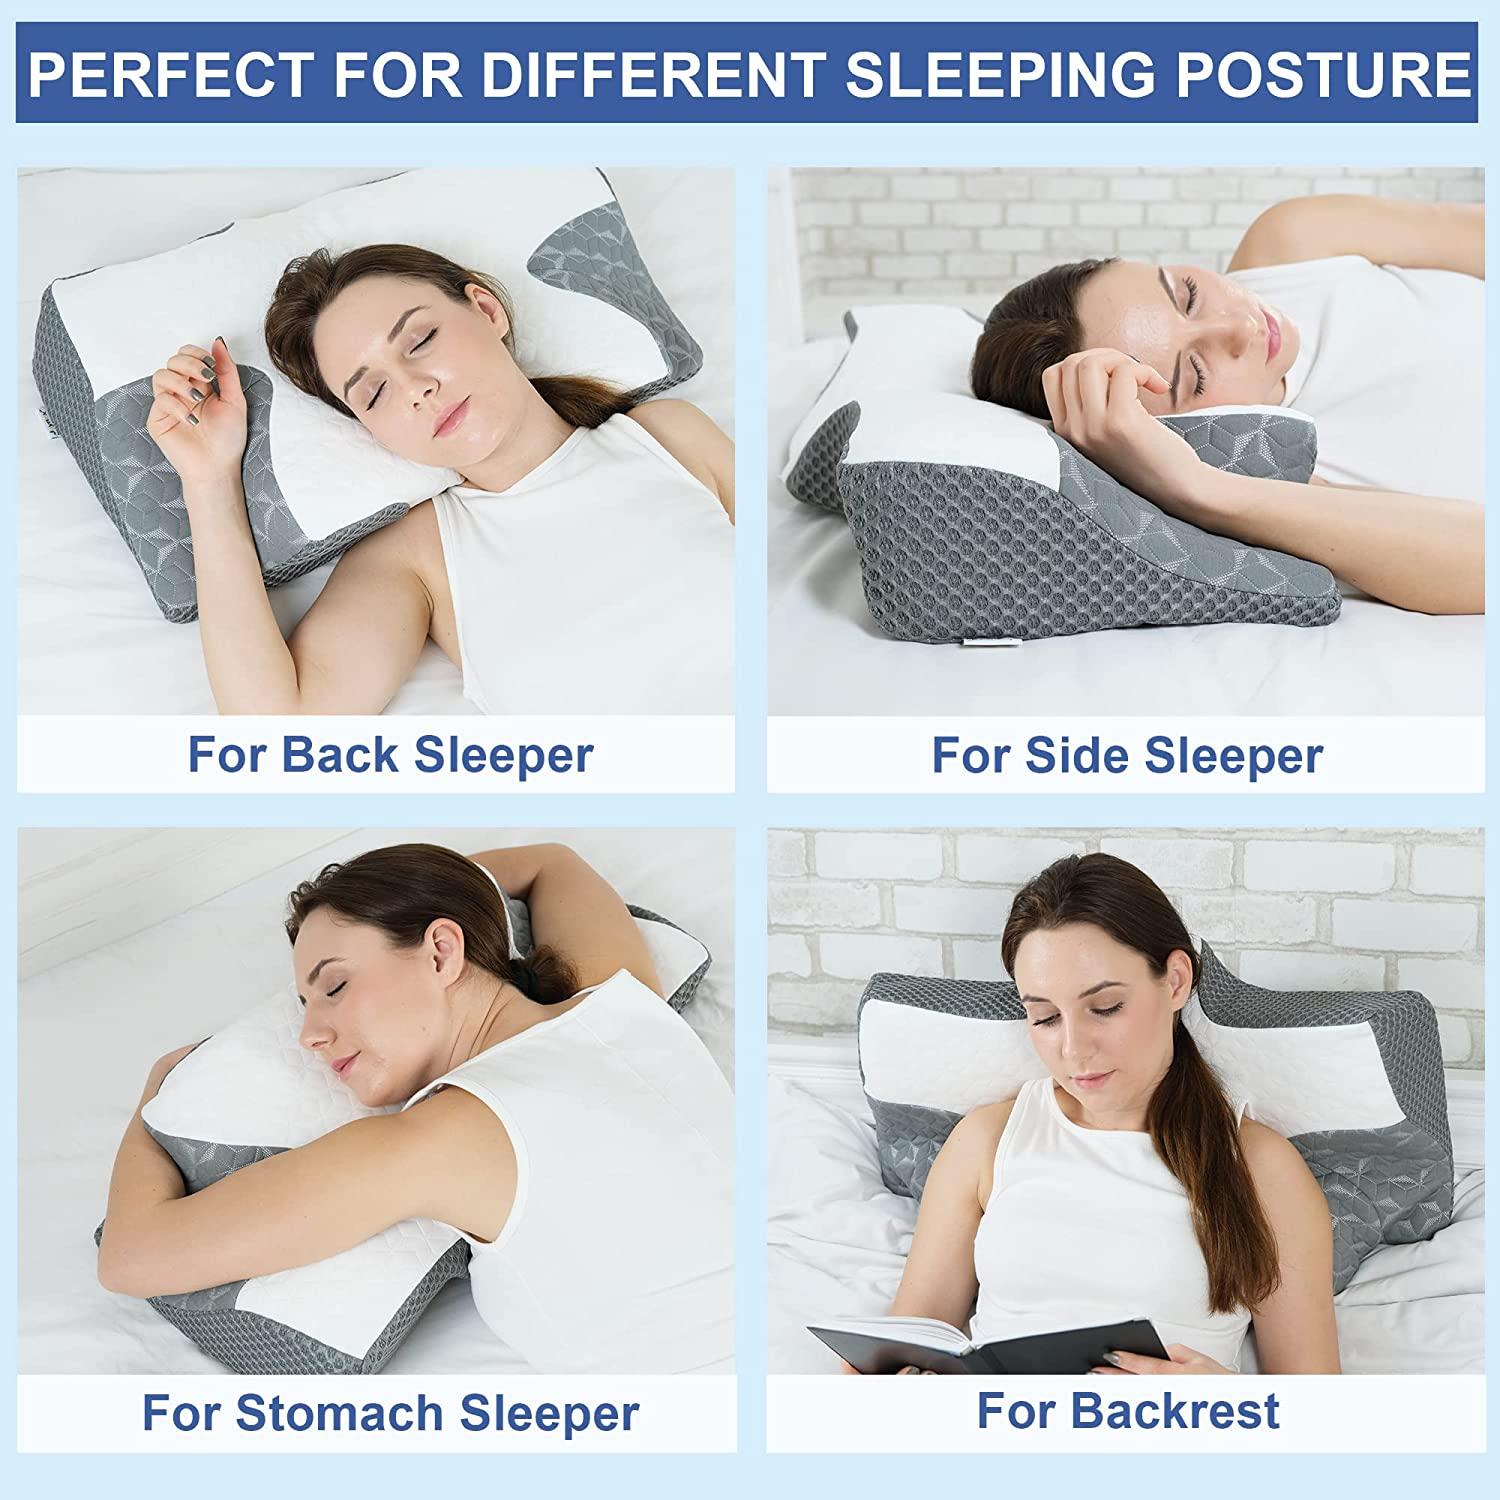 Cervical Memory Foam Pillow, Contour Pillows for Neck and Shoulder Pain, Ergonomic Orthopedic Sleeping Contoured Support Pillow for Side Sleepers